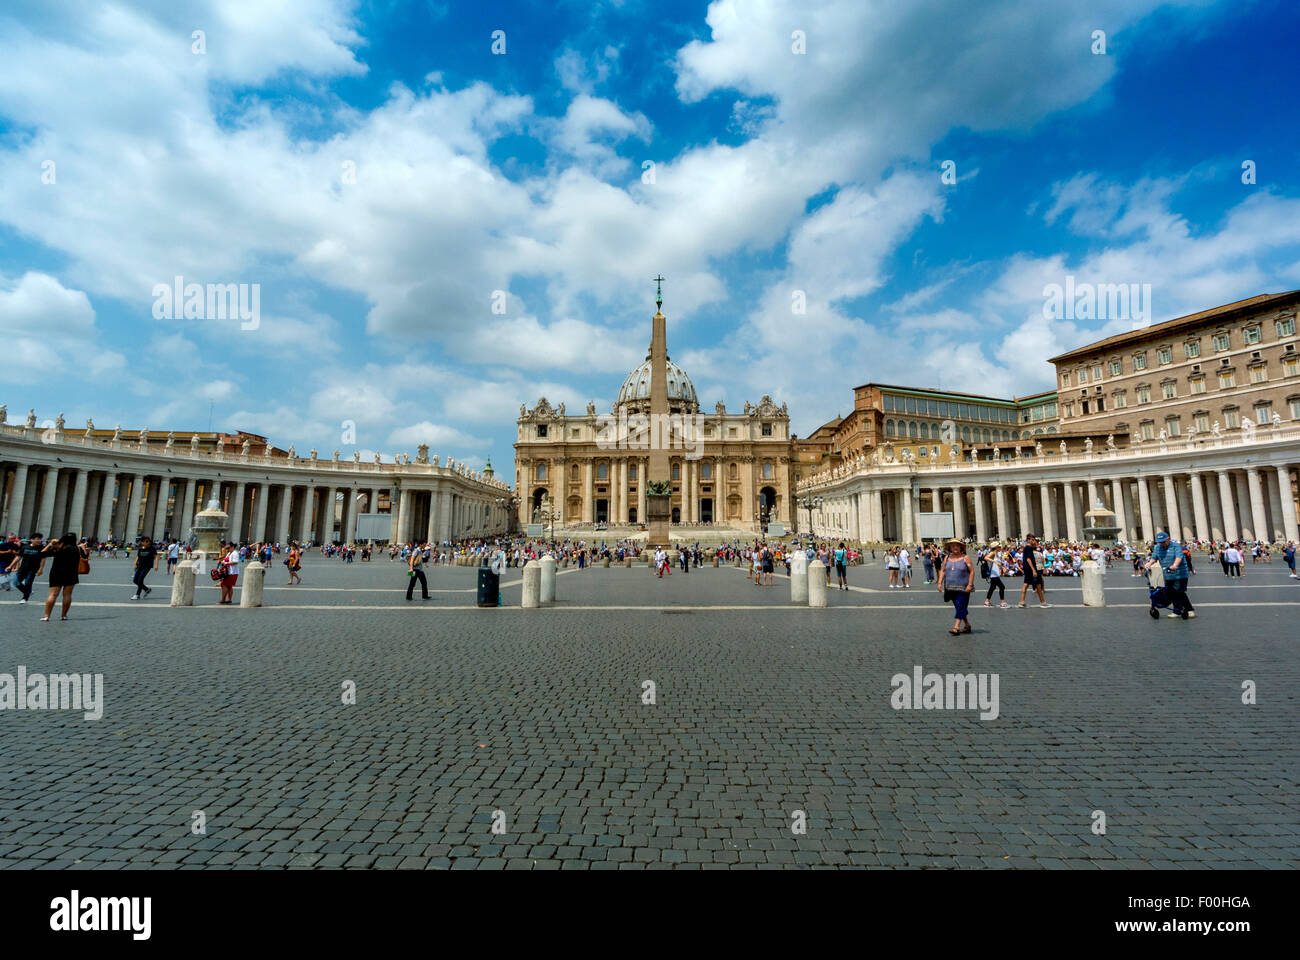 St Peter's basilica, St Peters Square. Vatican City, Rome. Italy. Stock Photo